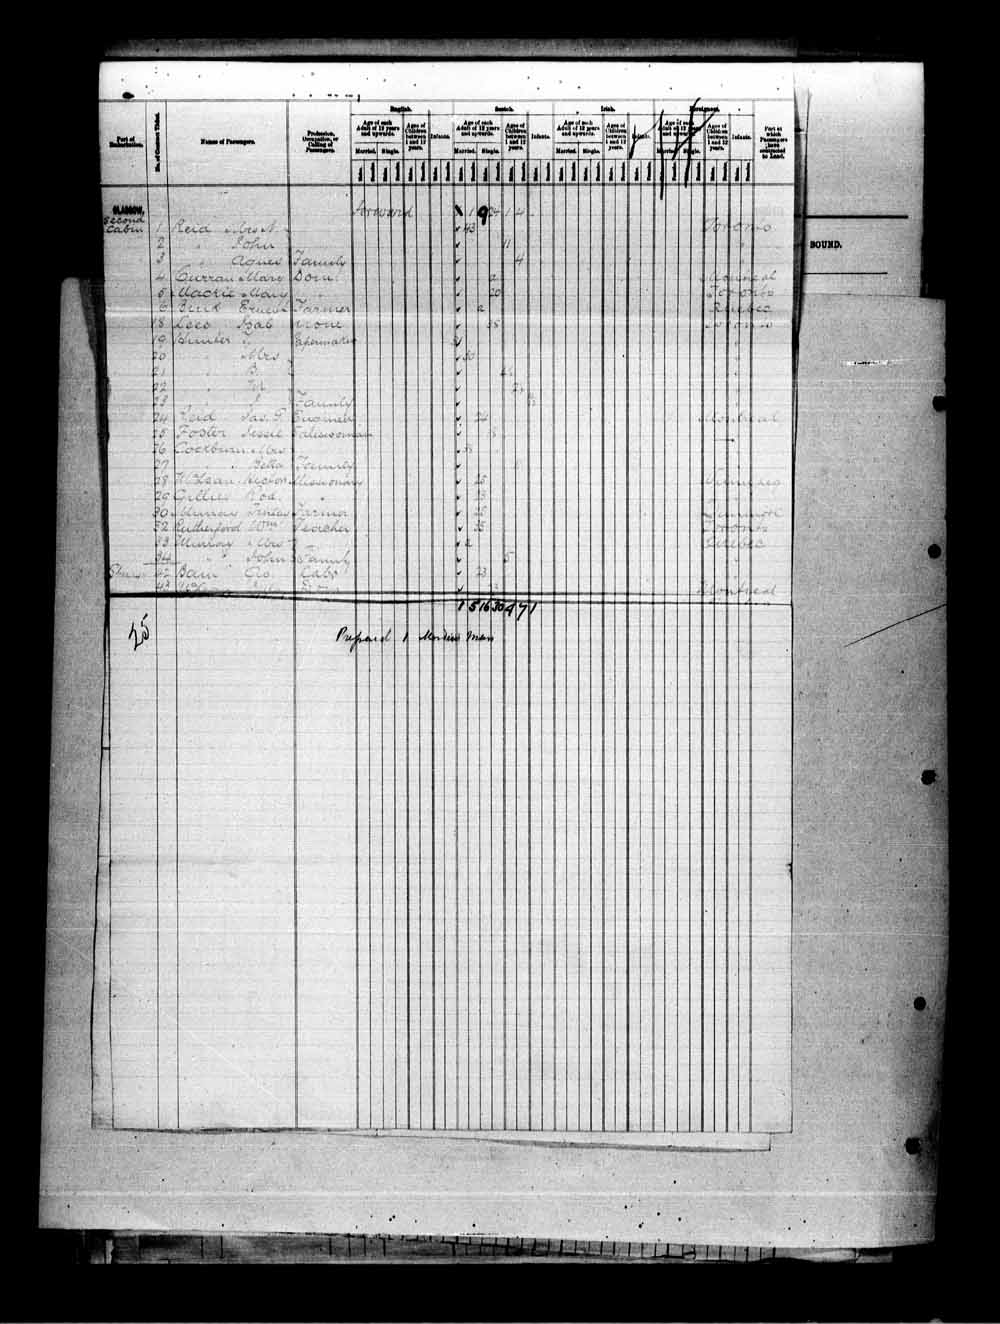 Digitized page of Quebec Passenger Lists for Image No.: e003551156